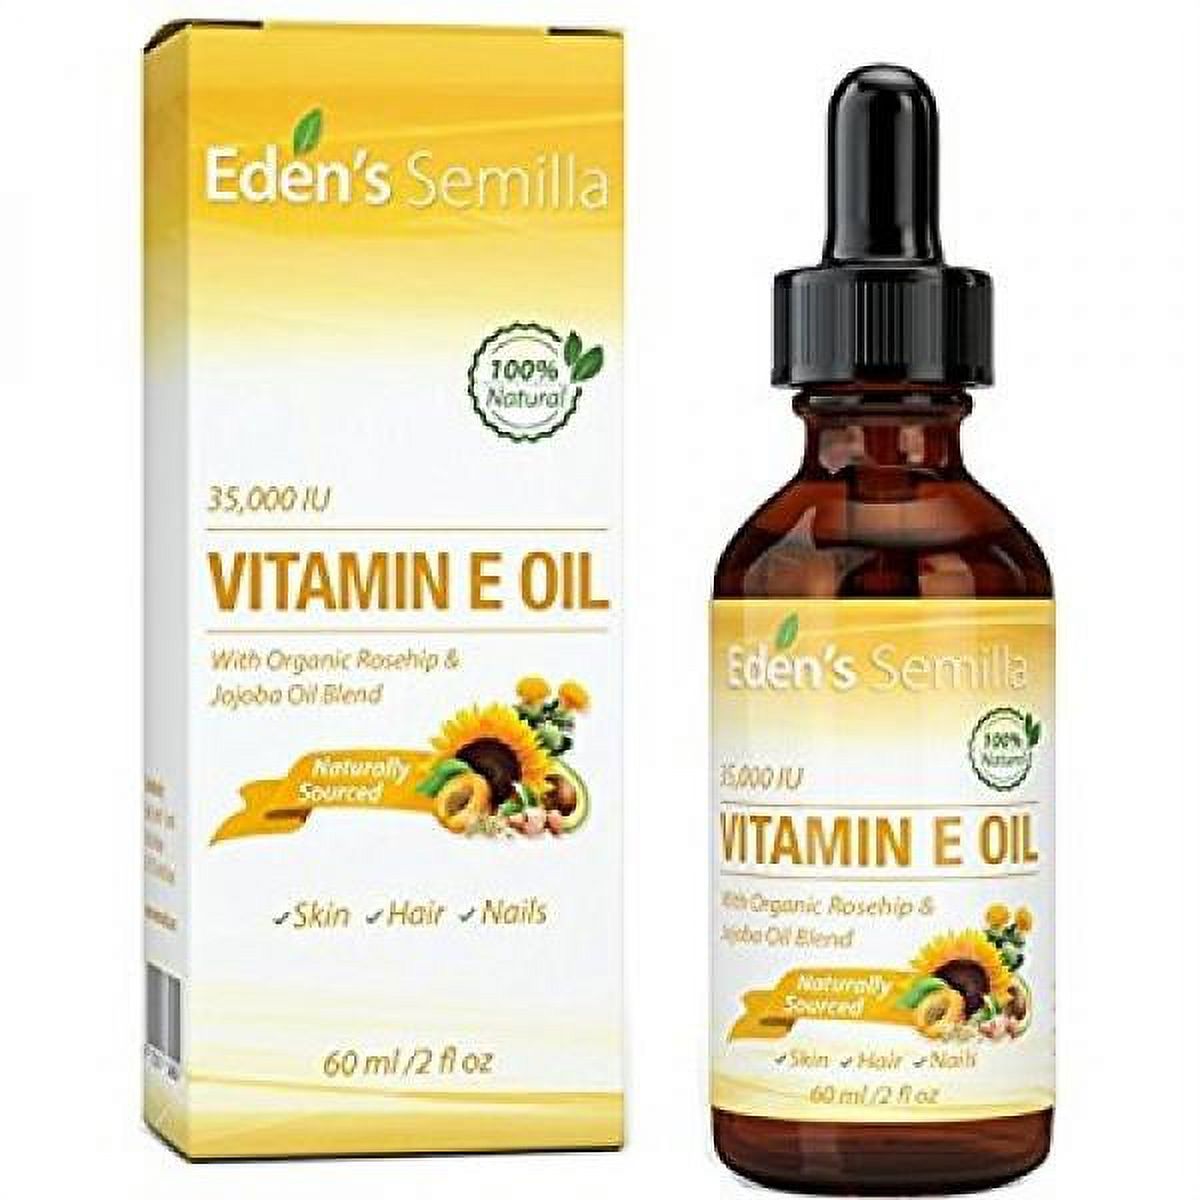 100% Natural Vitamin E Oil 35,000 IU + Organic Rosehip & Jojoba Blend - 2 OZ Bottle. FAST Absorbing Skin Protection For Face & Body. Pure Ingredients - Ideal For Sensitive Skin - Use Daily - image 1 of 4